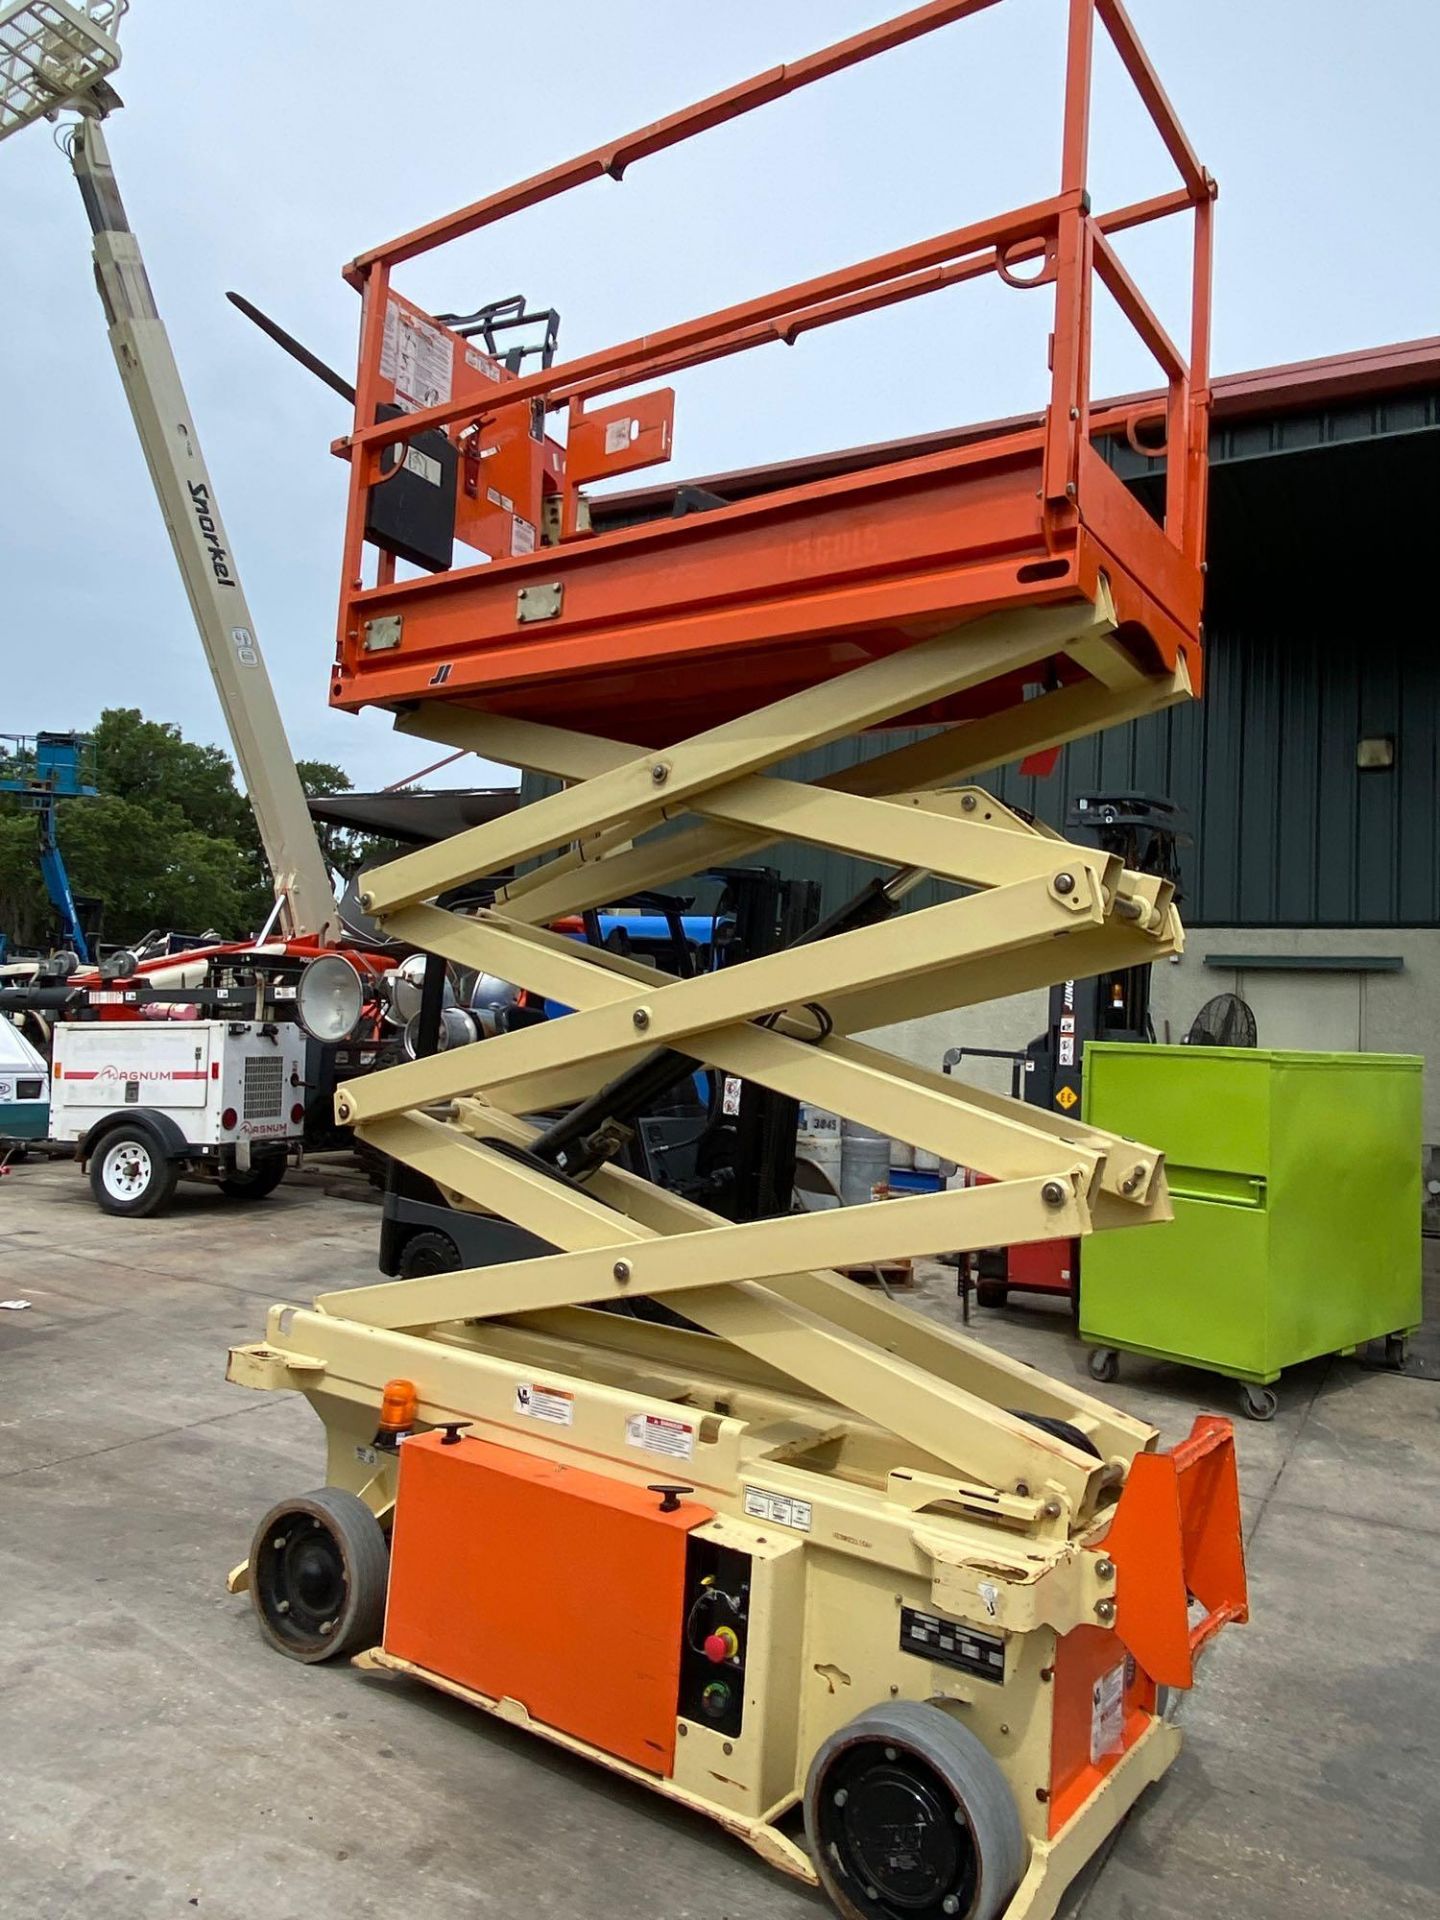 2015 JLG 1932RS ELECTRIC SCISSOR LIFT, SELF PROPELLED, 19' PLATFORM HEIGHTT, BUILT IN BATTERY CHARGE - Image 6 of 7